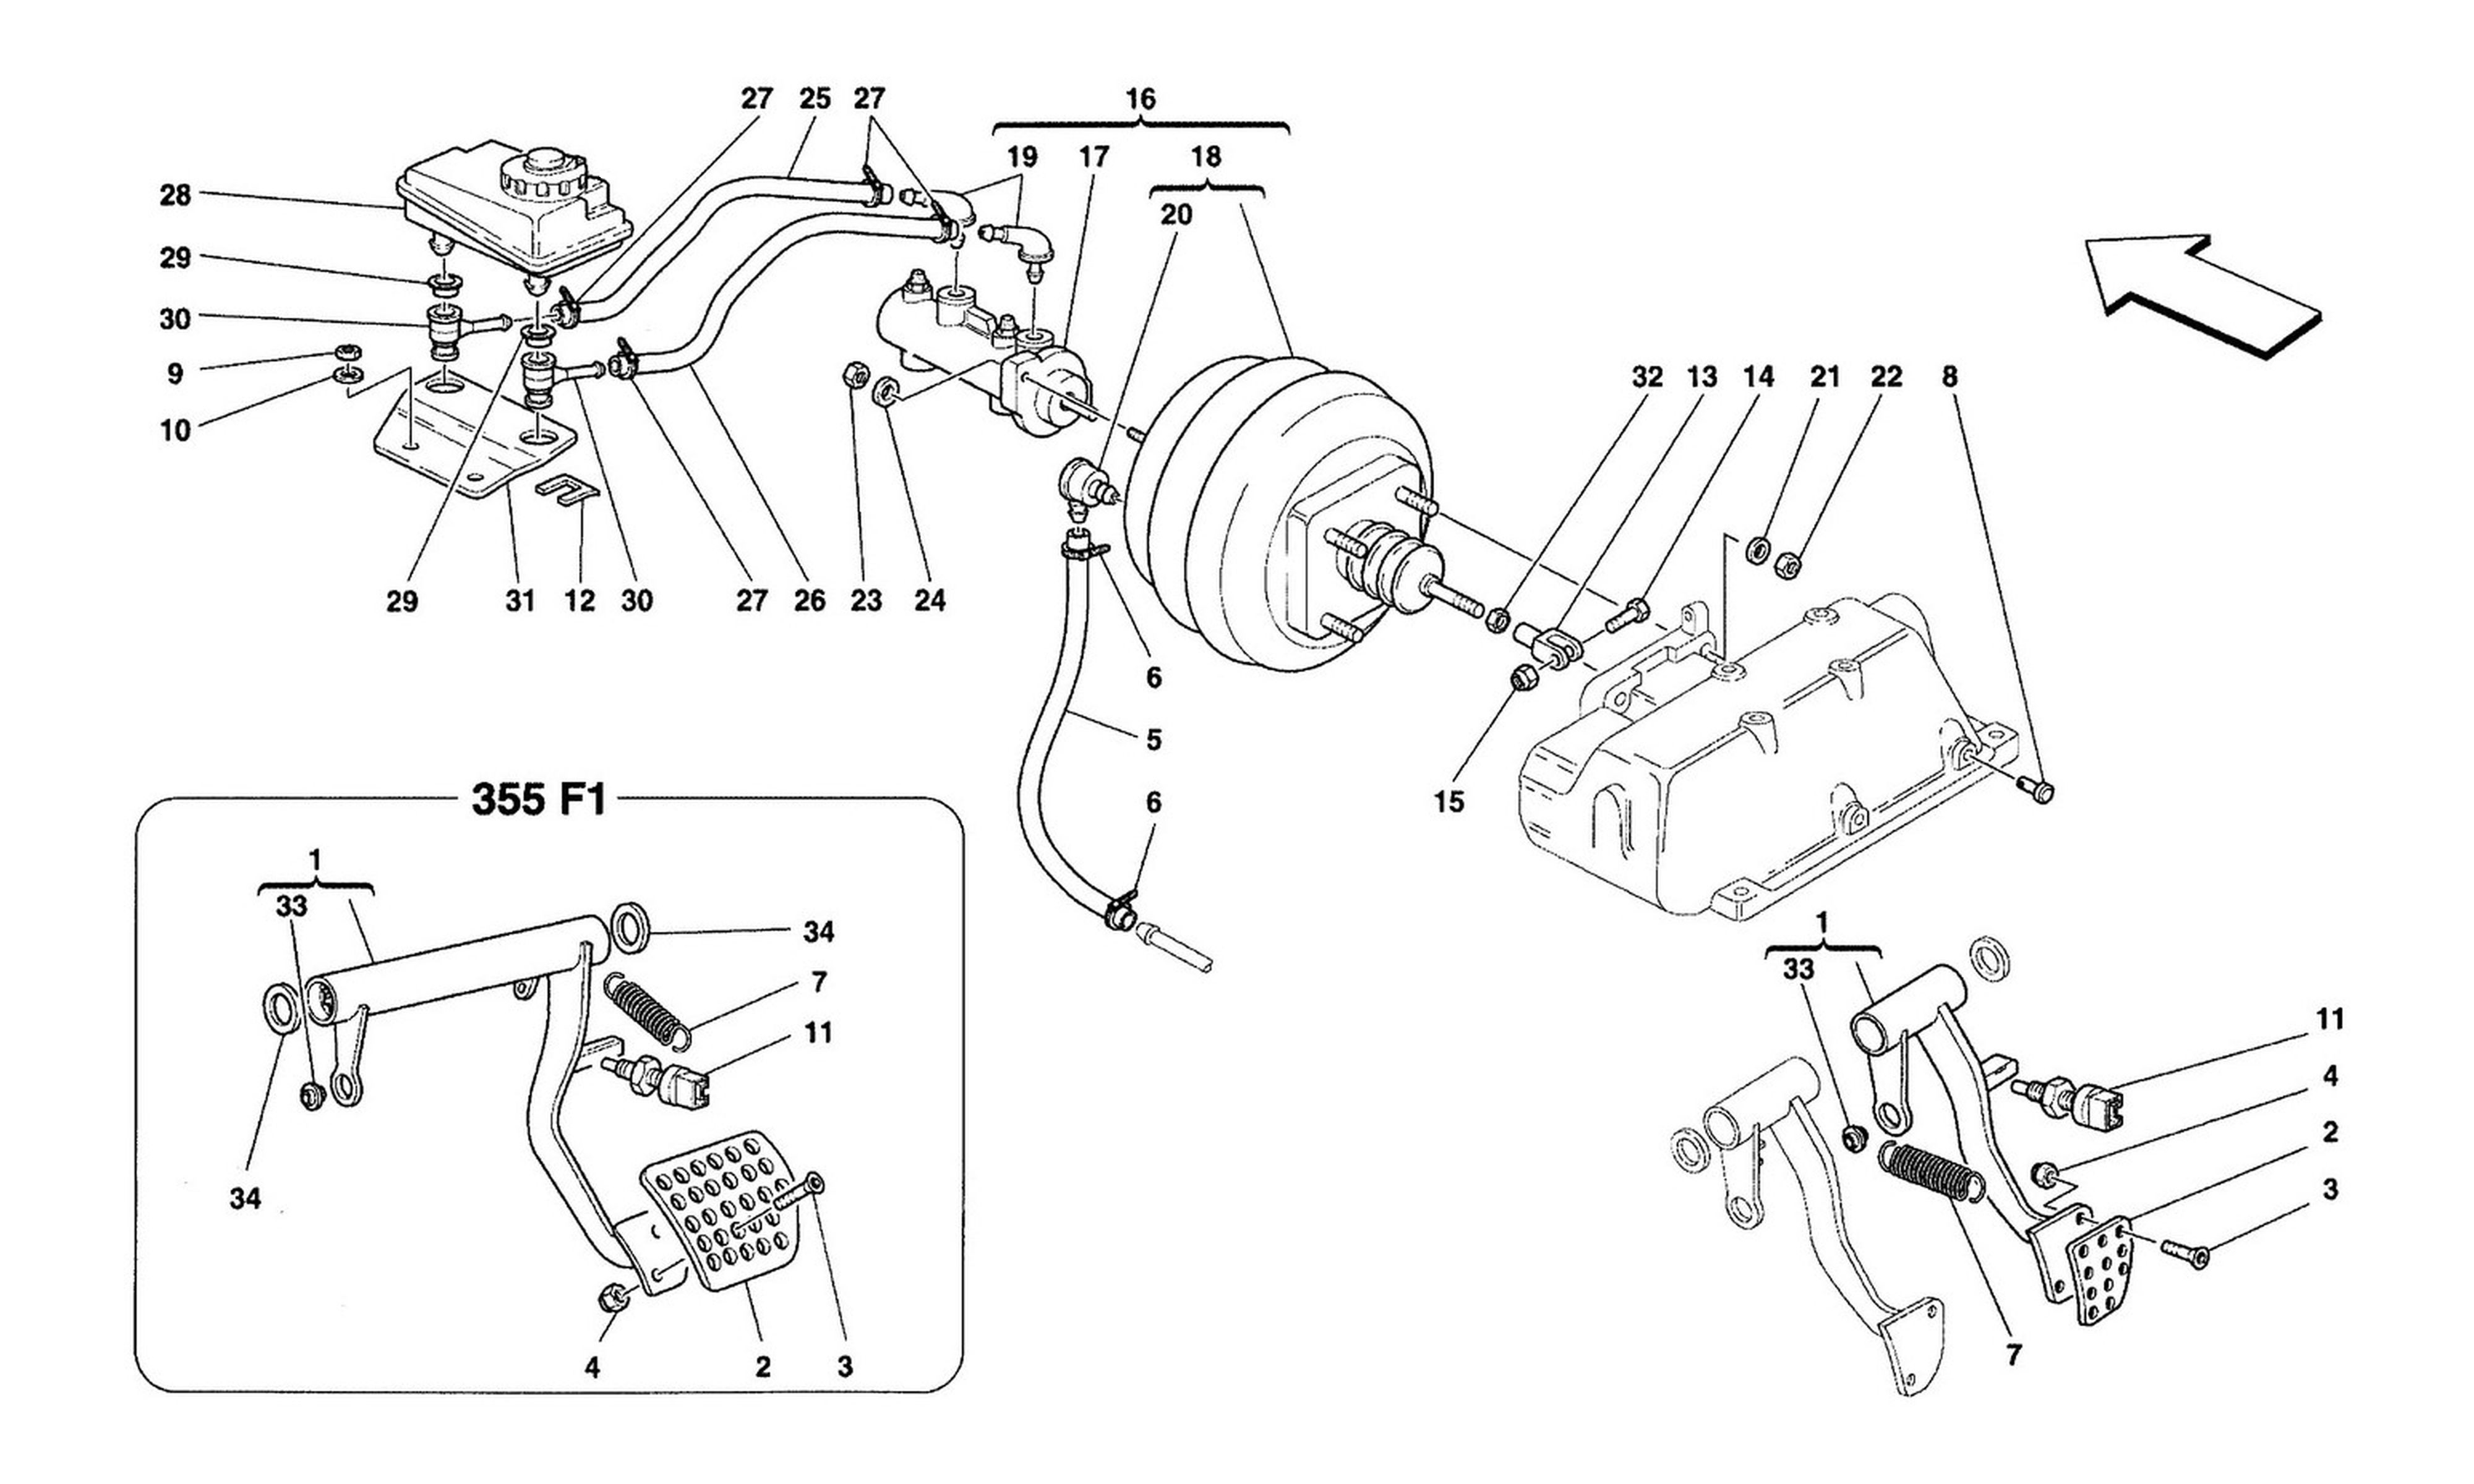 Schematic: Brake Hydraulic System -Valid For Abs Bosch And 355 F1 Cars-